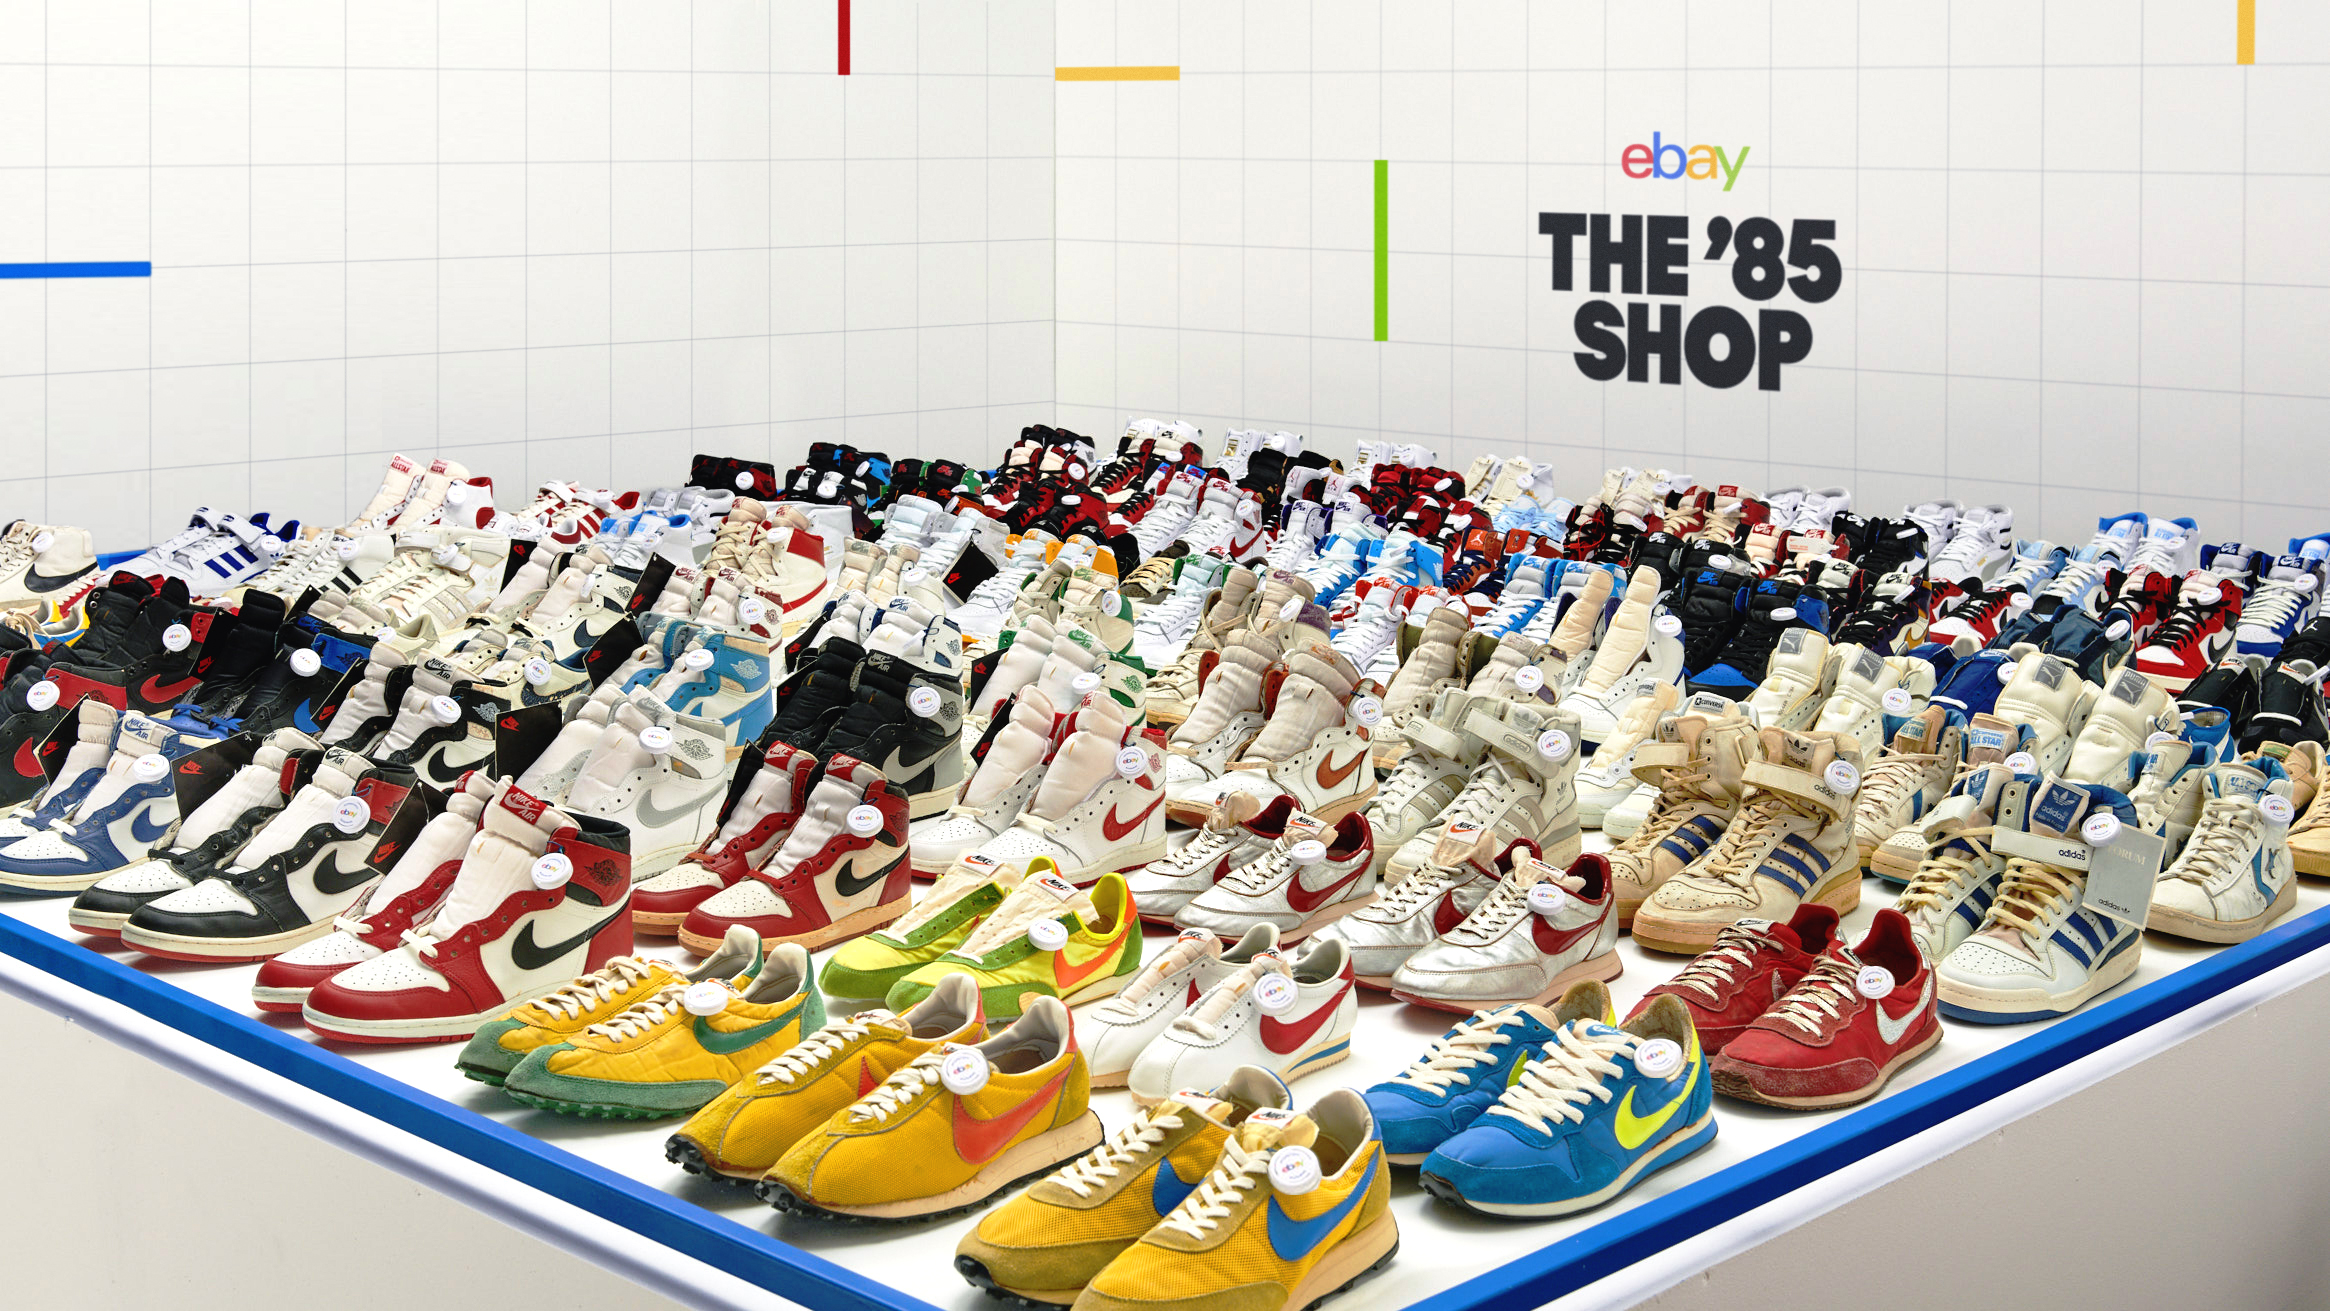 eBay Opens “The '85 Shop” Featuring the Collection of Original Air Jordan 1s Ever Assembled